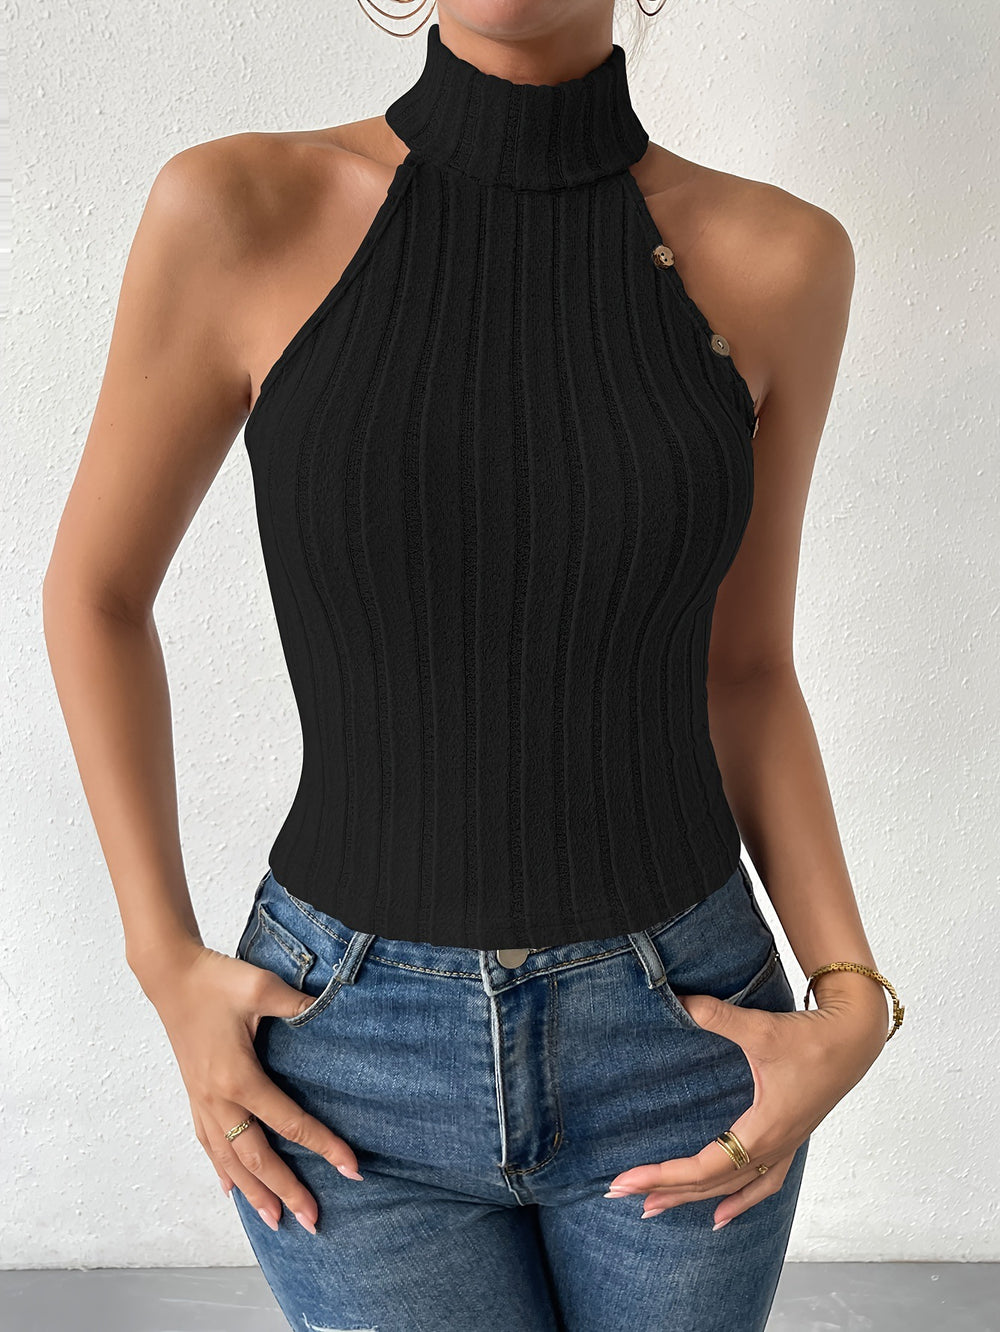 Women Summer Sleeveless Slimming Tight Knitted Top